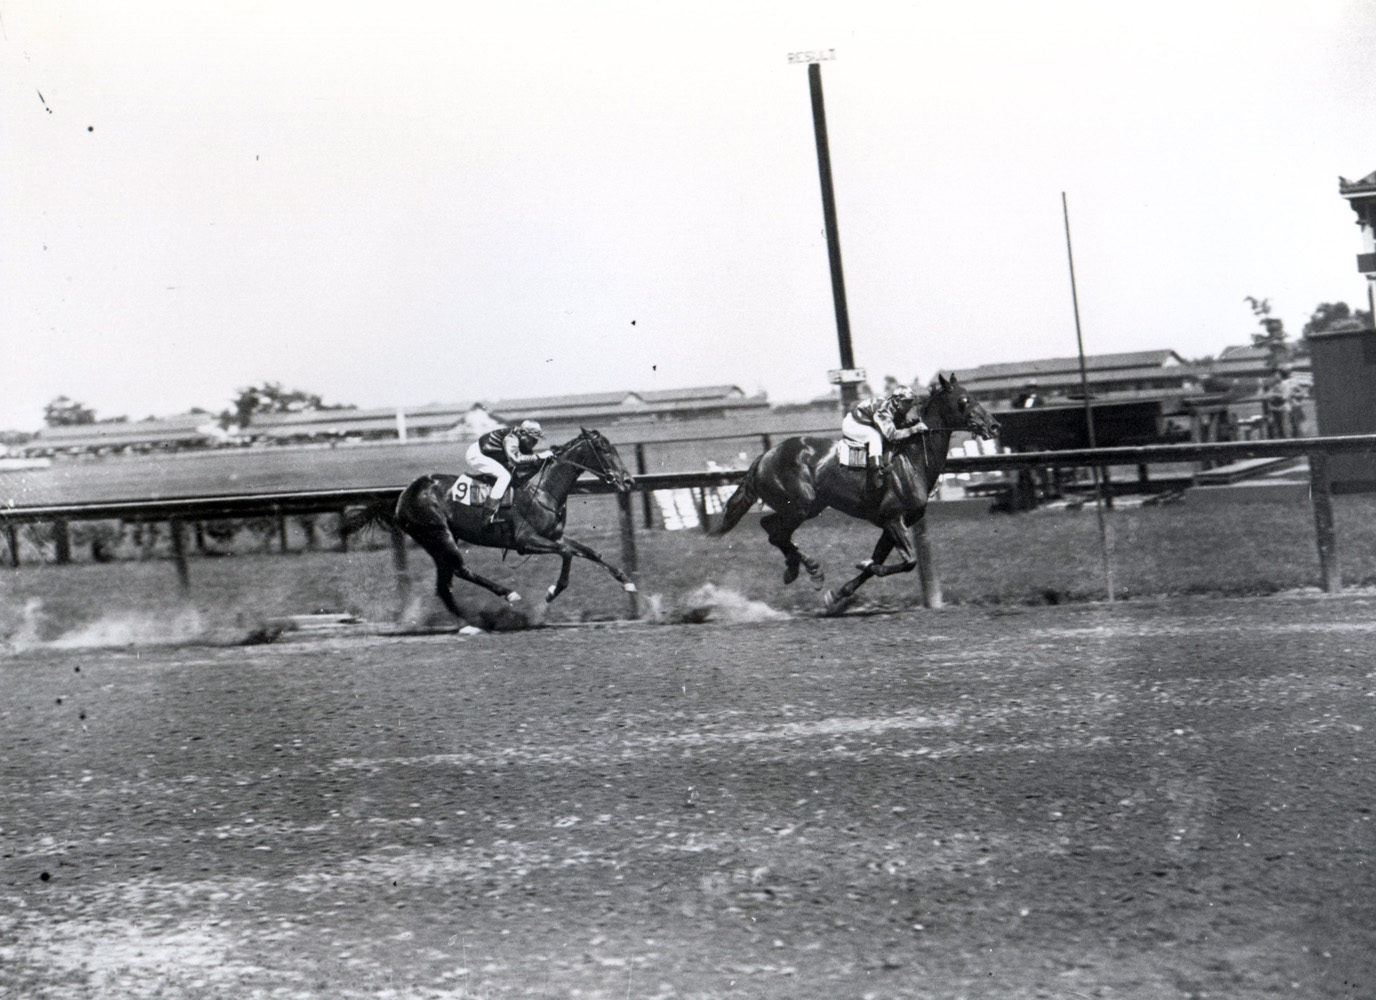 Roseben (Joe Notter up) winning the Sysonby Handicap at Sheepshead Bay, June 1908 (Keeneland Library Cook Collection/Museum Collection)